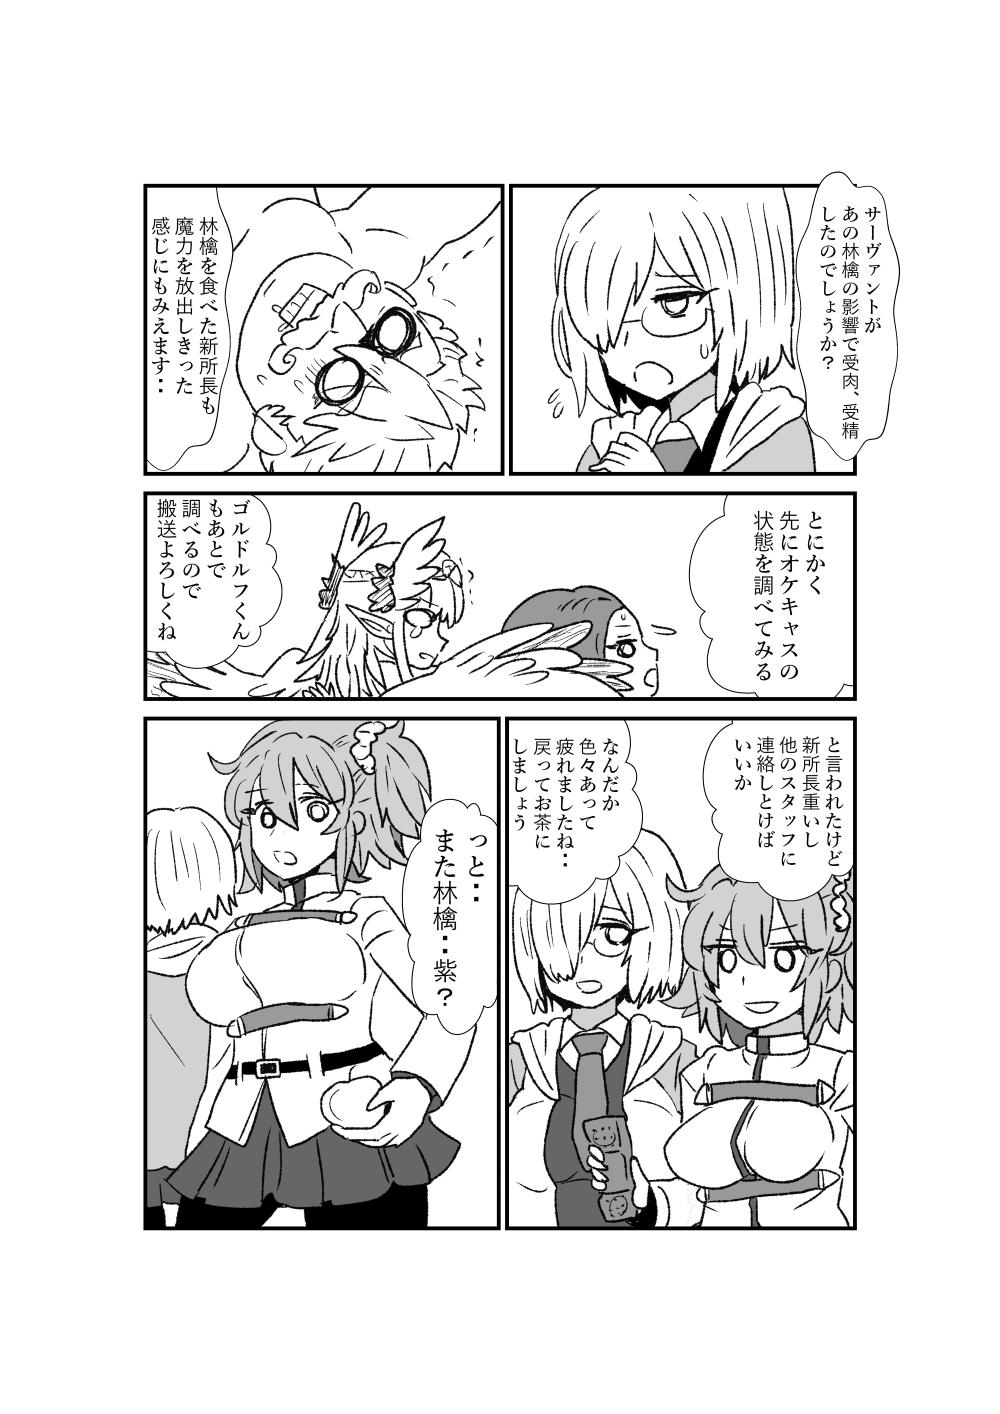 Anal Creampie FPO~桃色林檎の種付け周回～ - Fate grand order Ride - Page 9